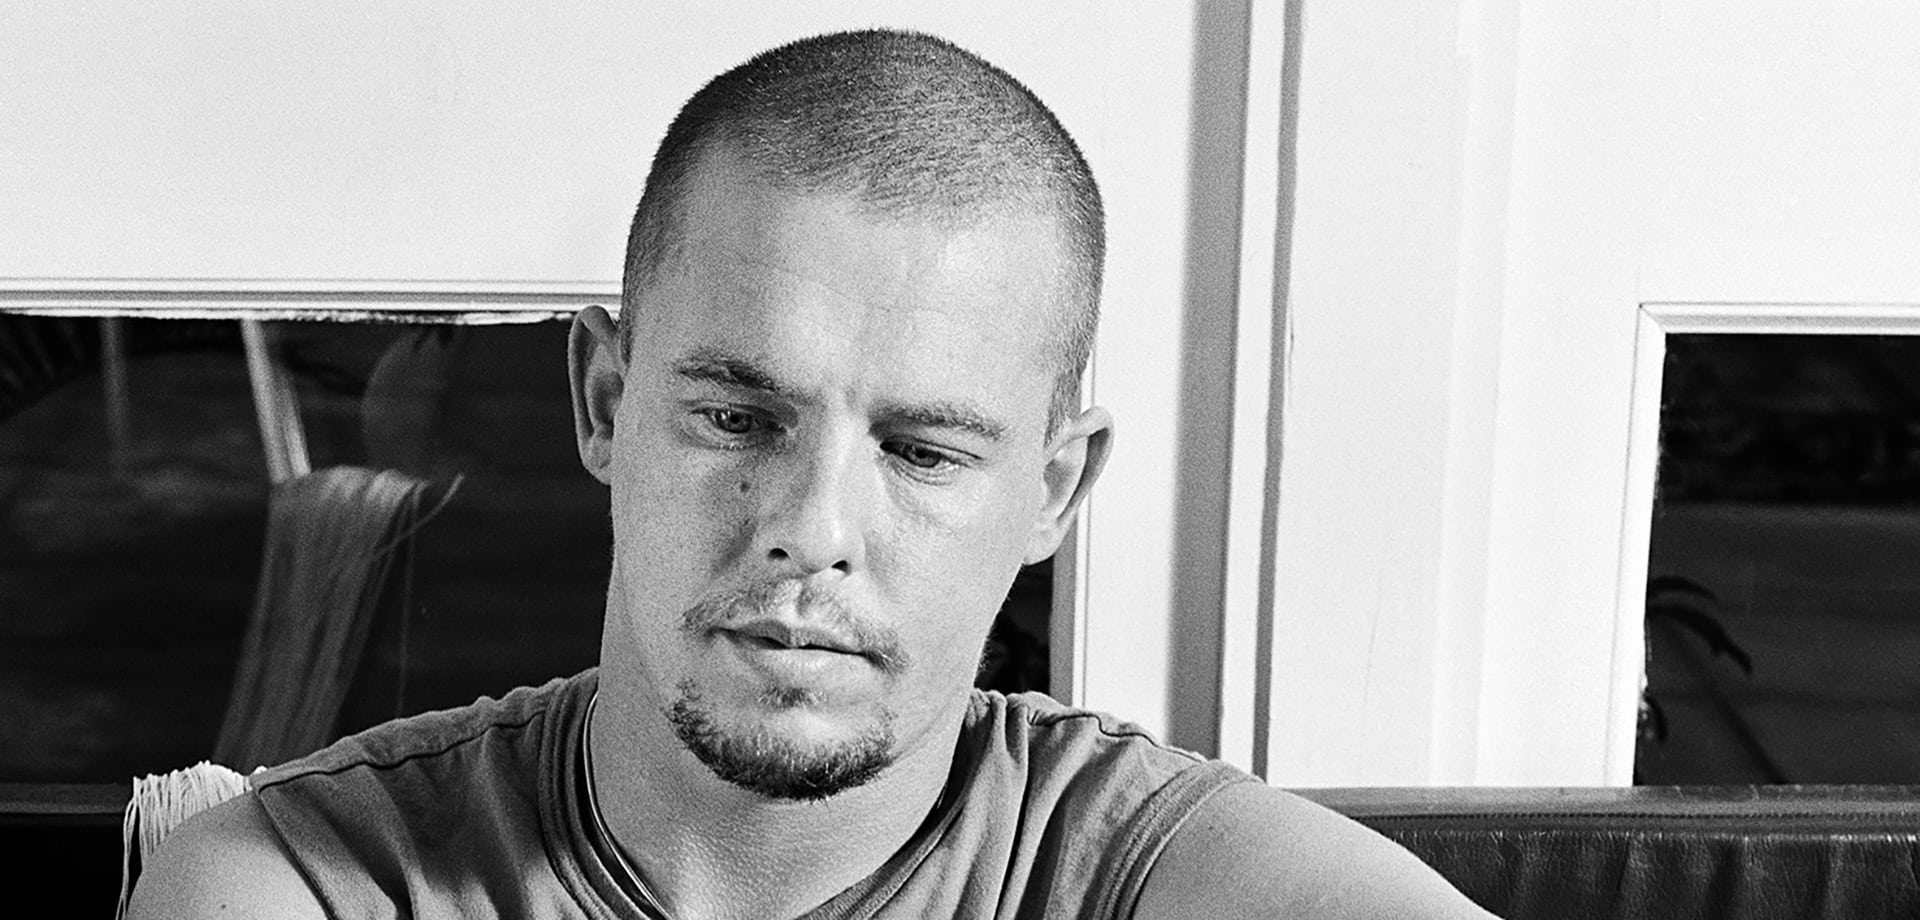 Intimate portraits taken by one of Alexander McQueen's closest